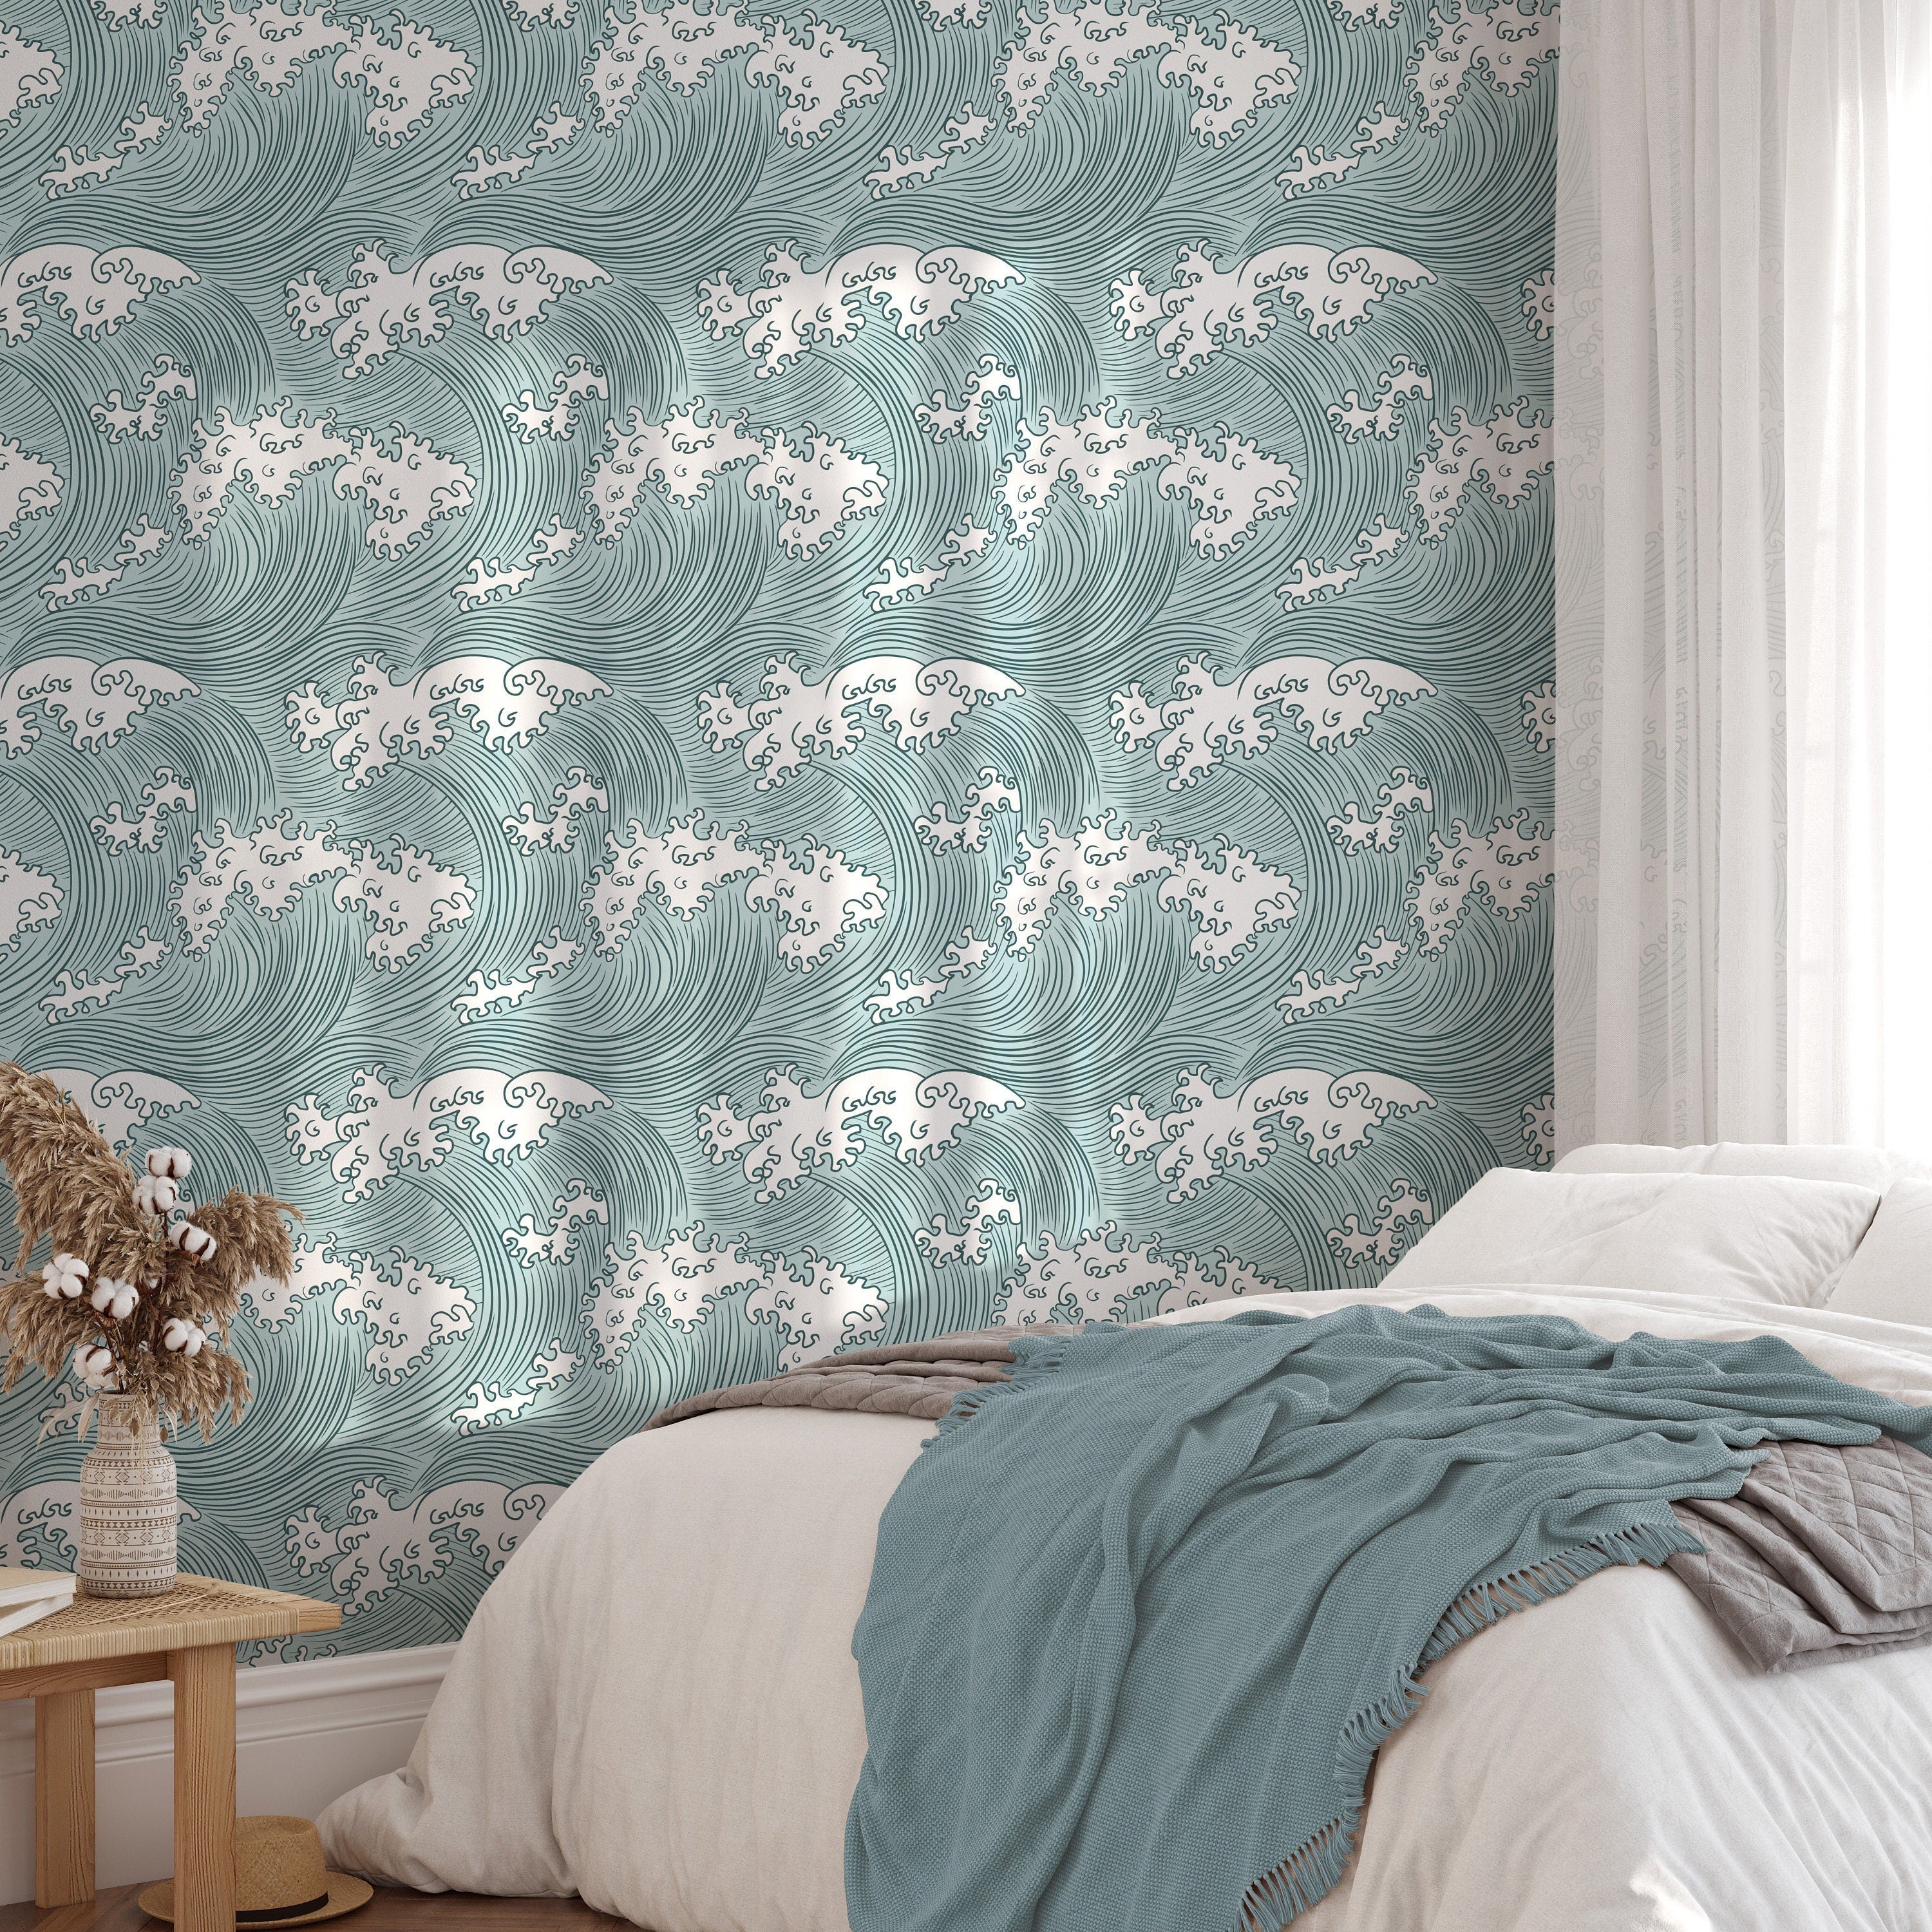 Blue Nautical Peel and Stick Removable Wallpaper 4019  On Sale   34161405